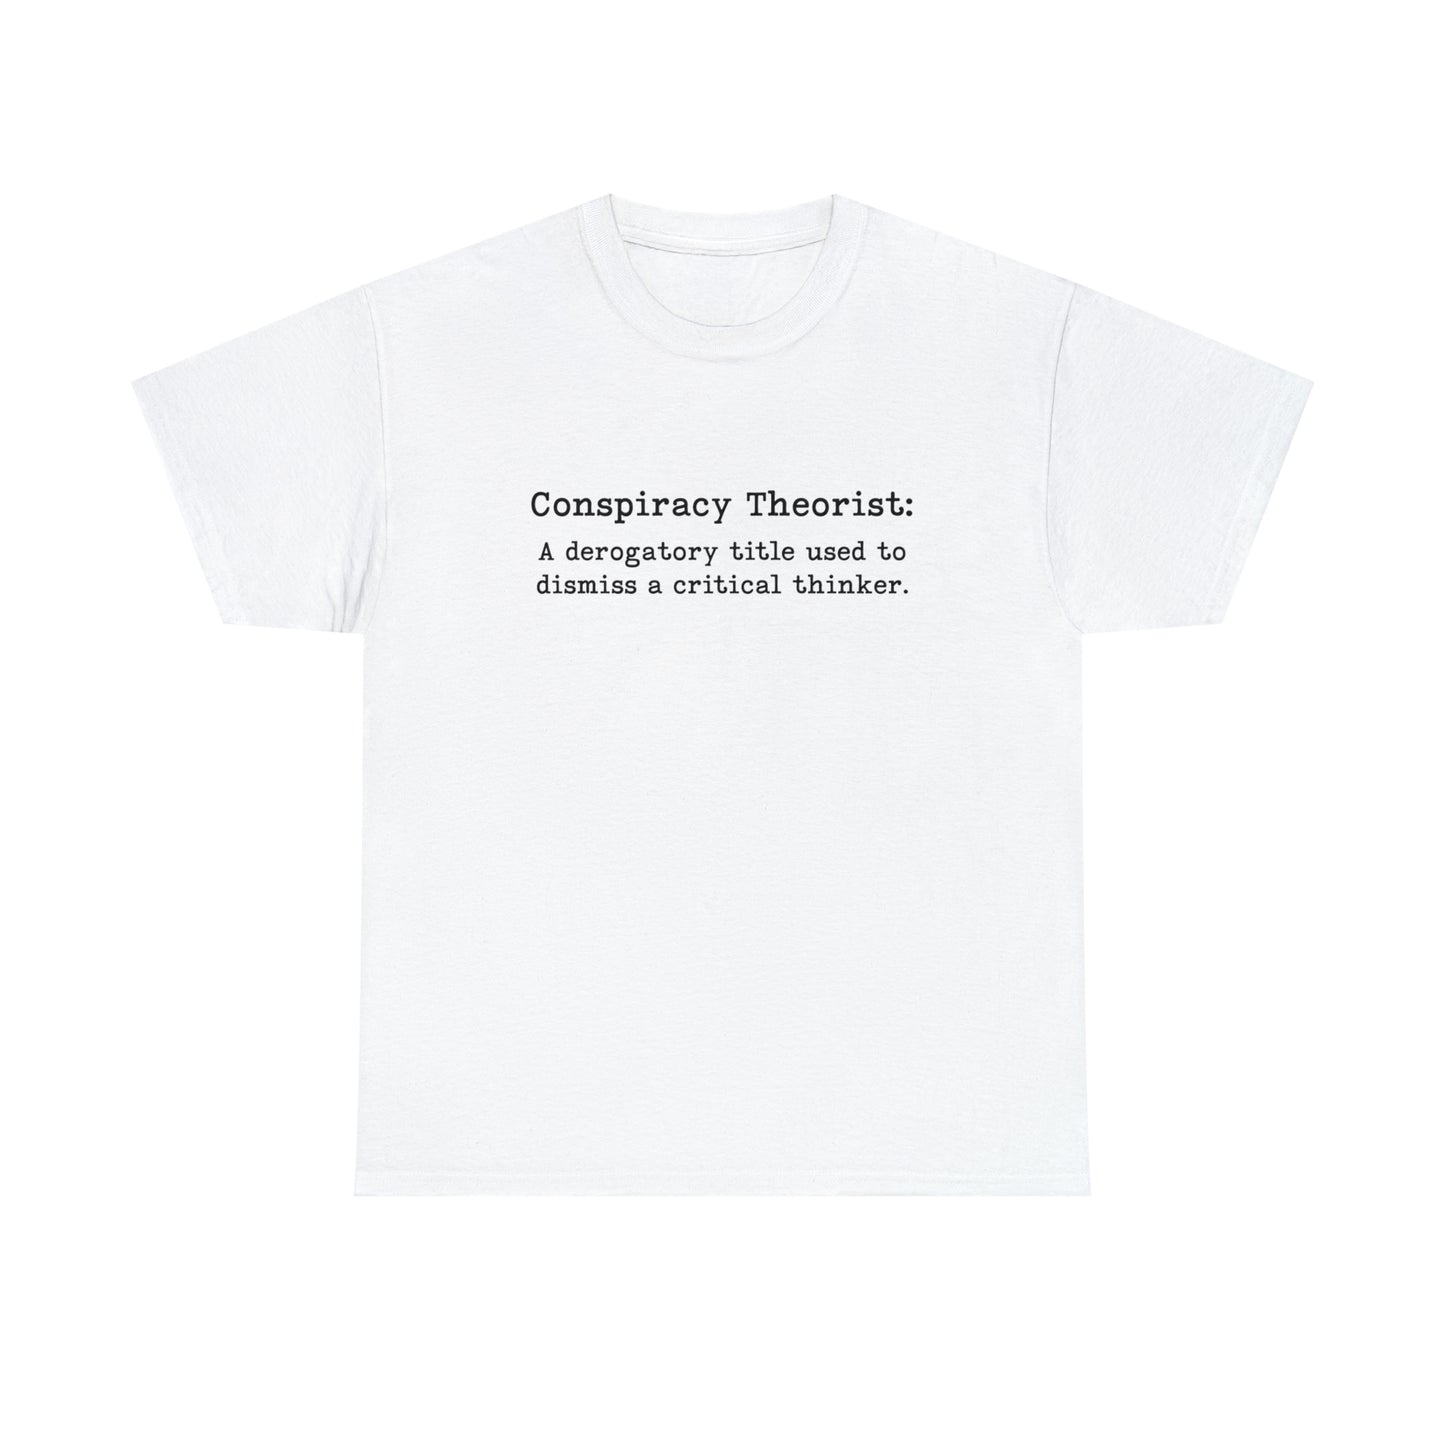 Conspiracy Theorist Definition T-Shirt For Conspiracy Realist TShirt For Conservative T Shirt For Global Agenda Shirt For Patriot Tee